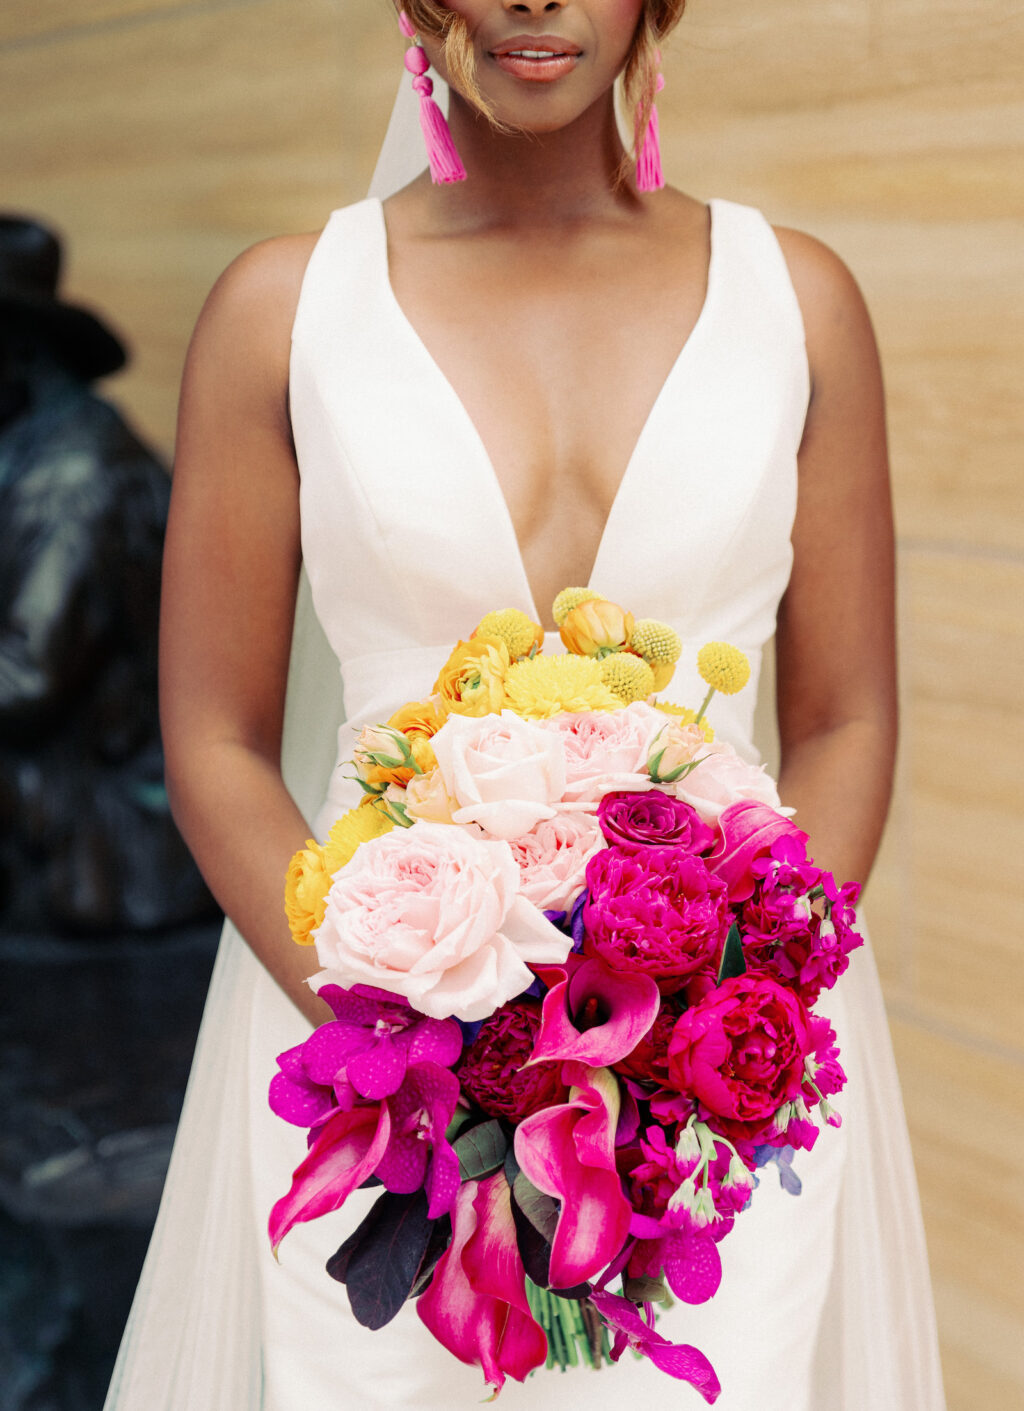 Modern Bride in Classic White Wedding Dress Holding Colorful Vibrant Whimsical Fuschia Pink, Blush and Yellow Floral Bouquet | Tampa Bay Wedding Photographer Dewitt for Love | Wedding Planner Wilder Mind Events |